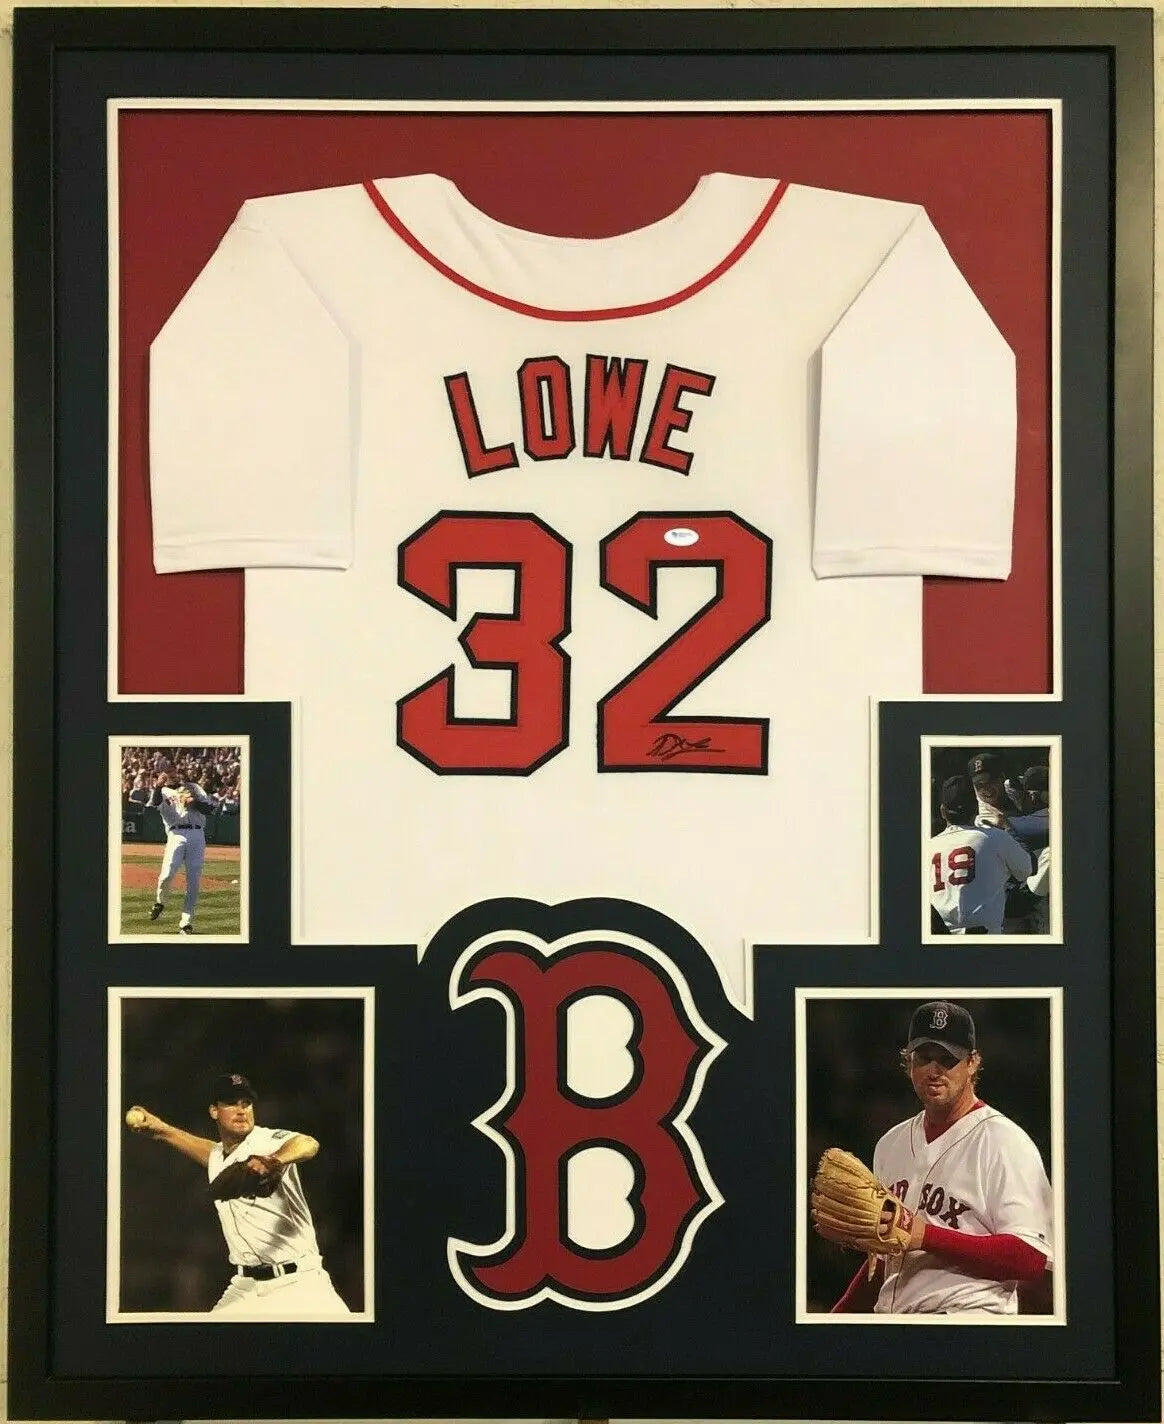 Autographed Boston Red Sox Jerseys, Autographed Red Sox Jerseys